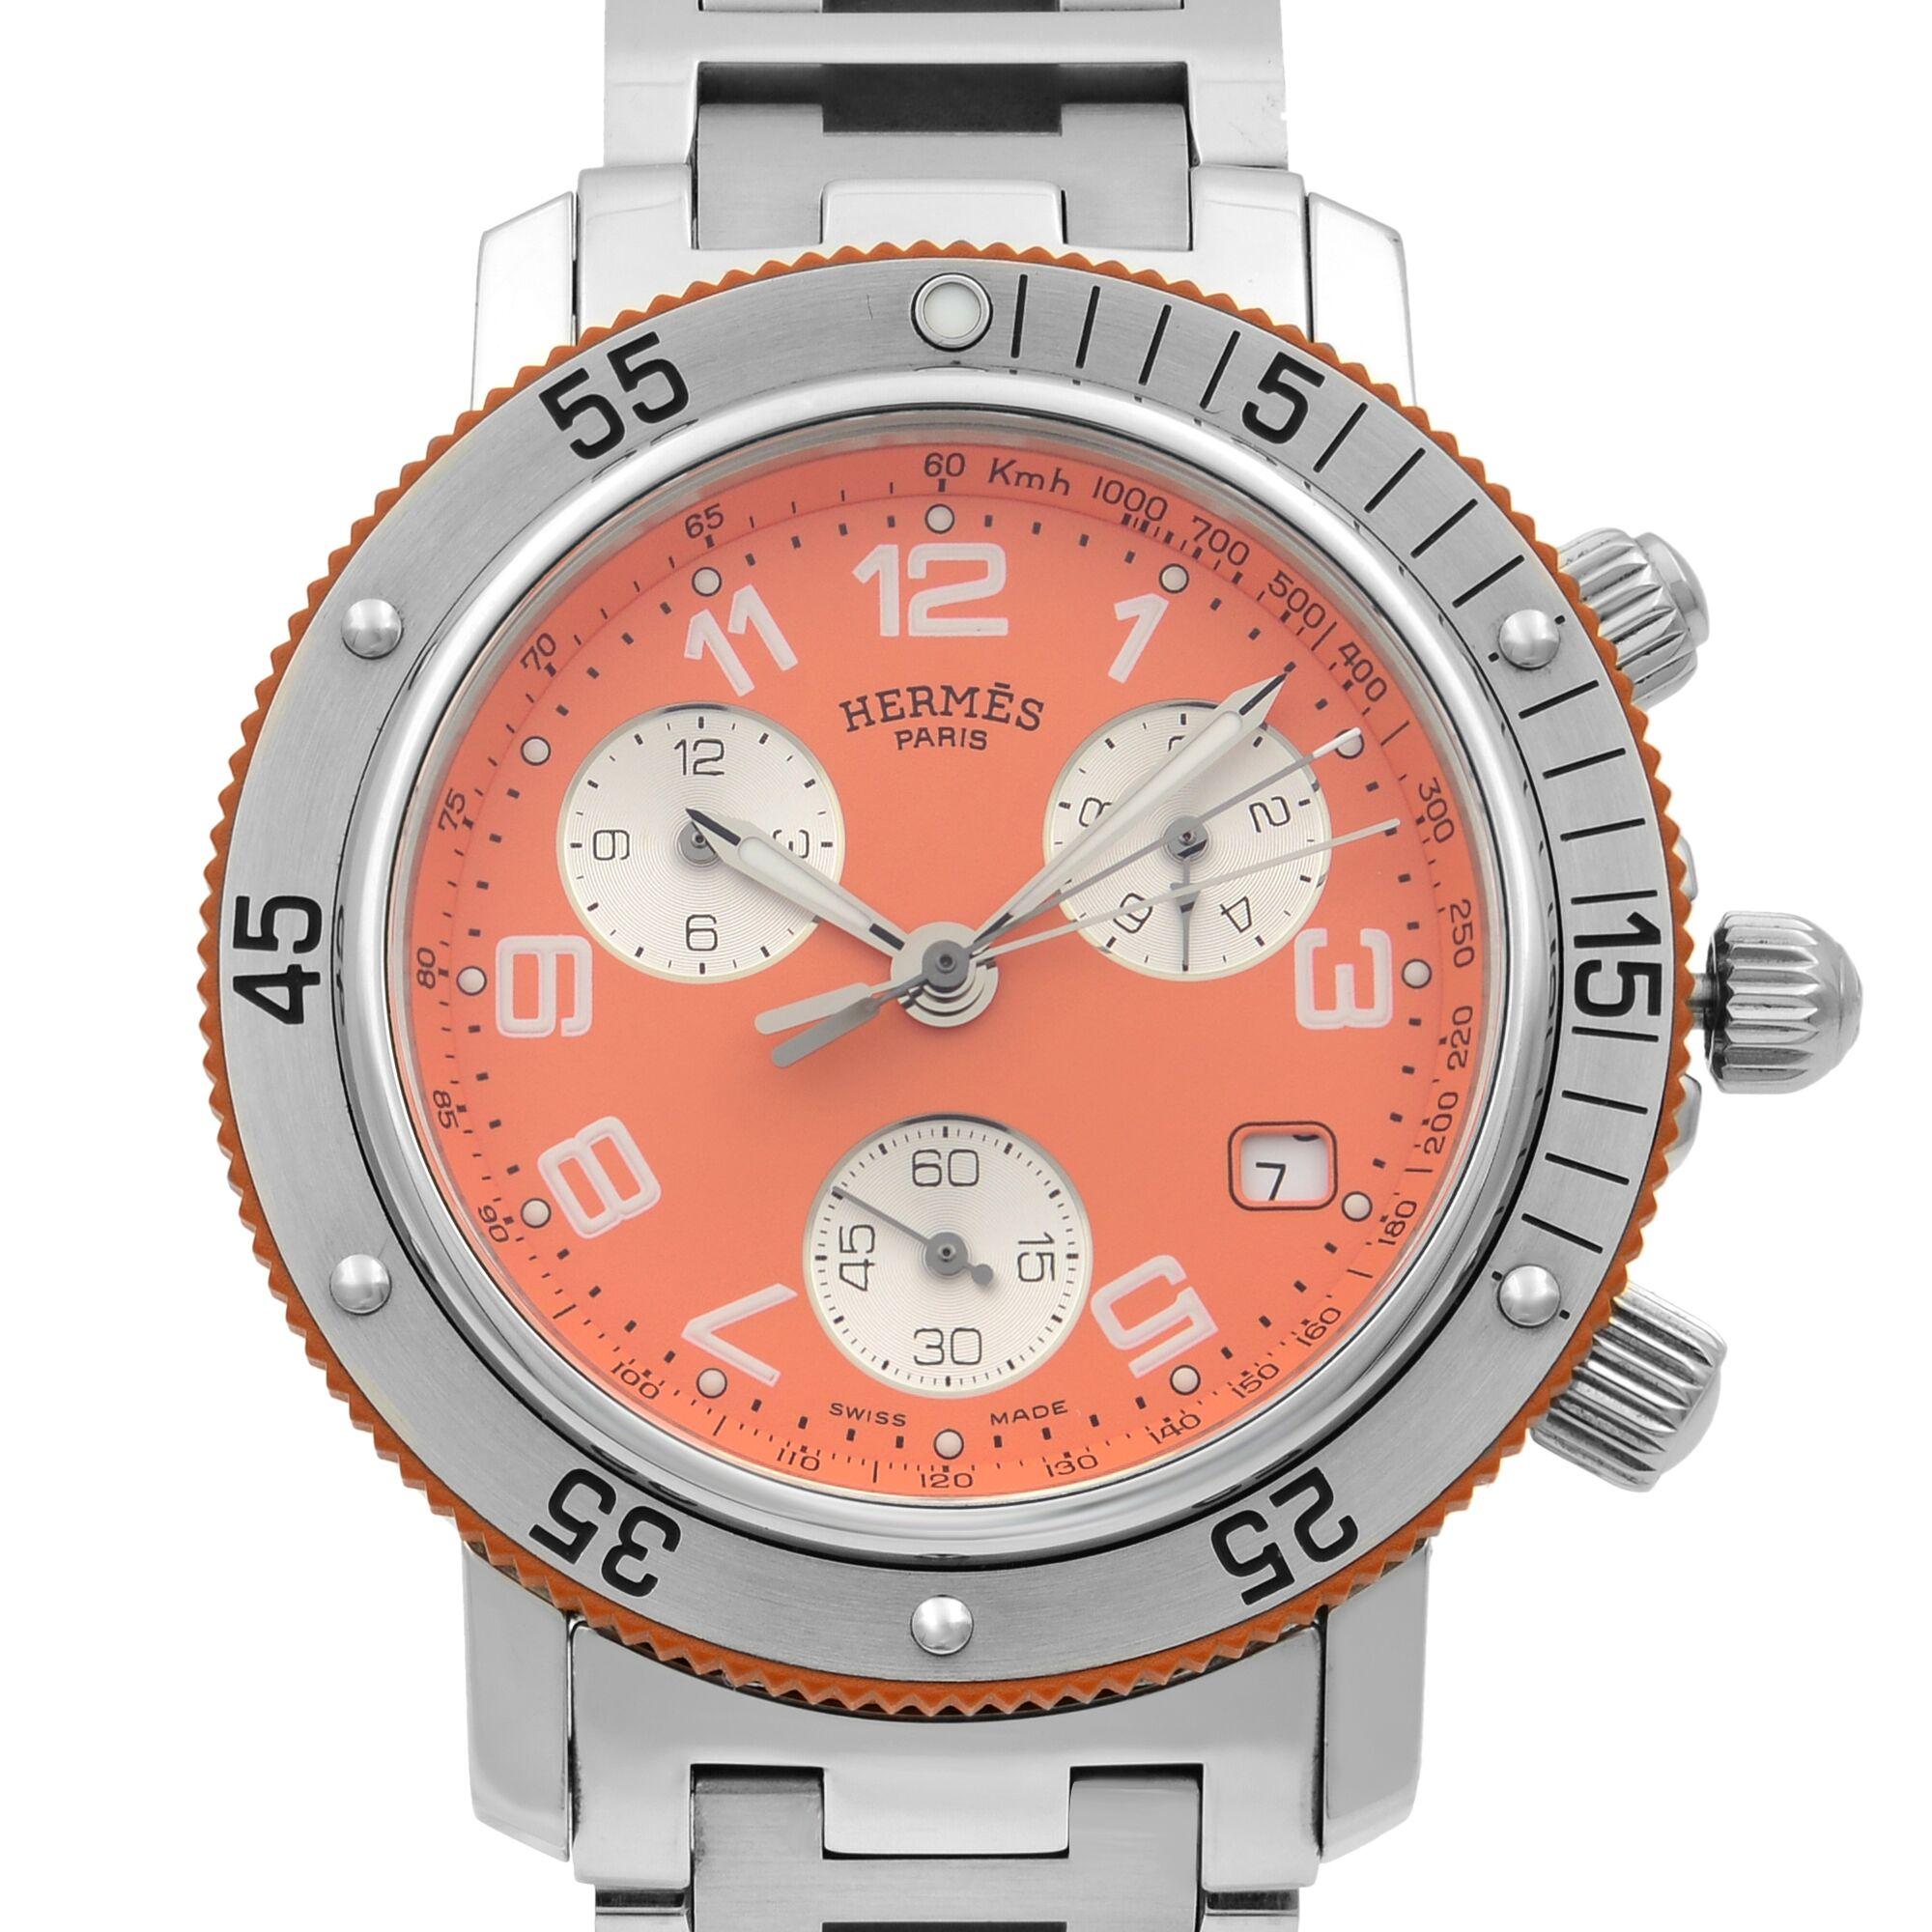 This pre-owned Hermes Clipper CL2.916 is a beautiful men's timepiece that is powered by quartz (battery) movement which is cased in a stainless steel case. It has a round shape face, chronograph, chronograph hand, date indicator, small seconds